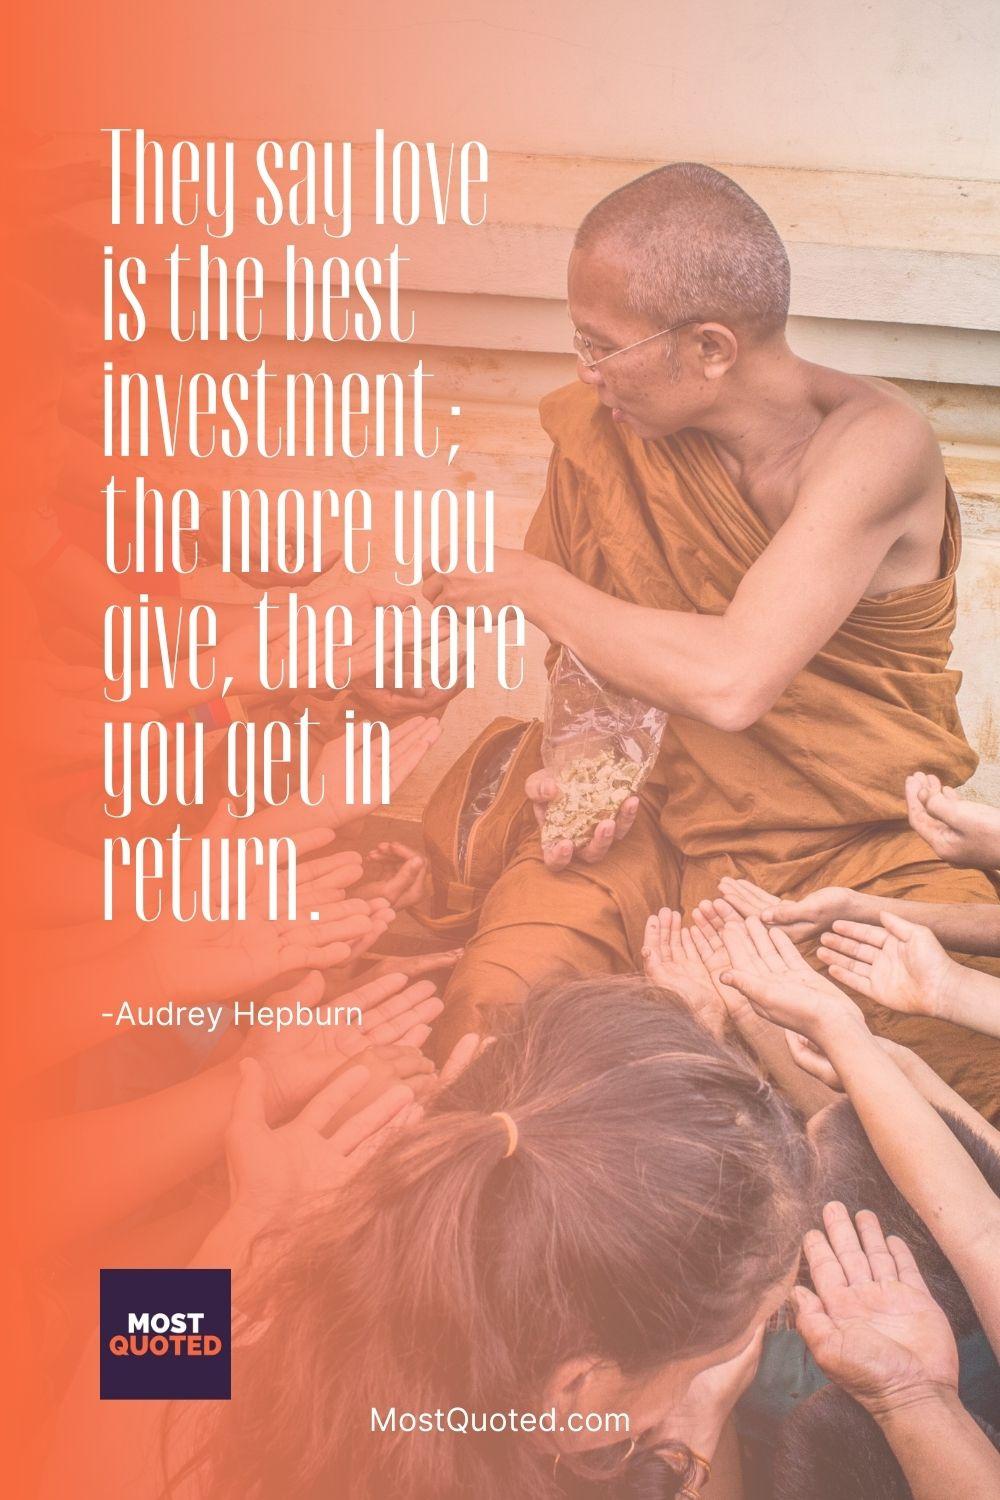 They say love is the best investment; the more you give, the more you get in return. - Audrey Hepburn